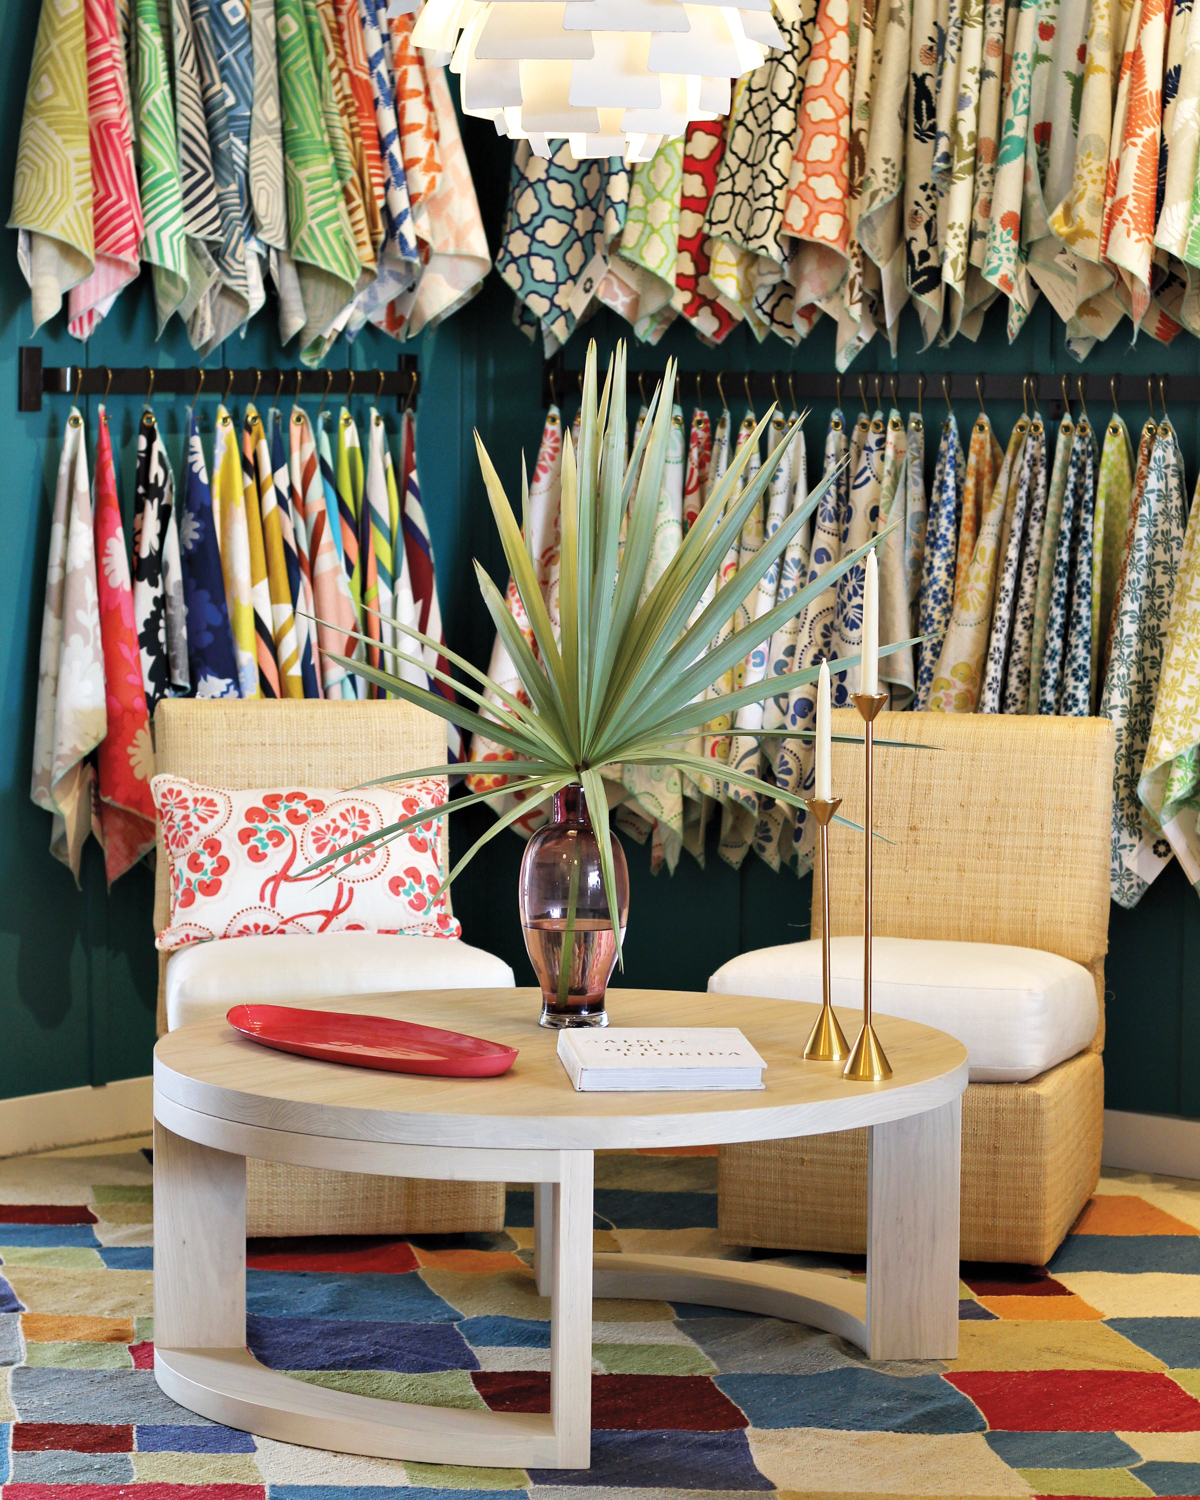 Wall of textile samples behind a small seating area atop a colorful rug